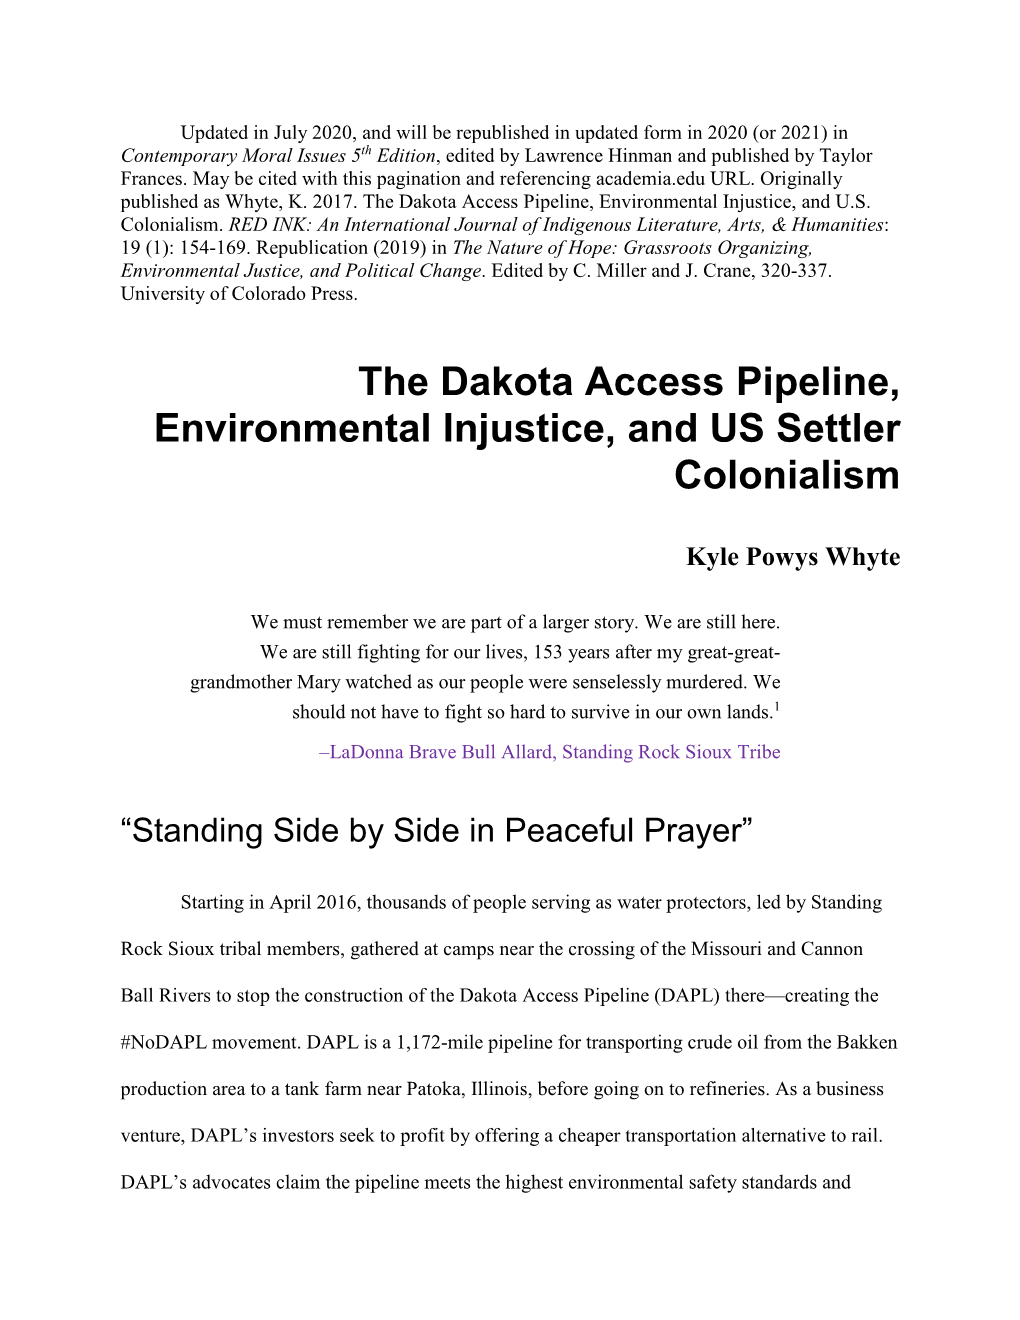 The Dakota Access Pipeline, Environmental Injustice, and US Settler Colonialism